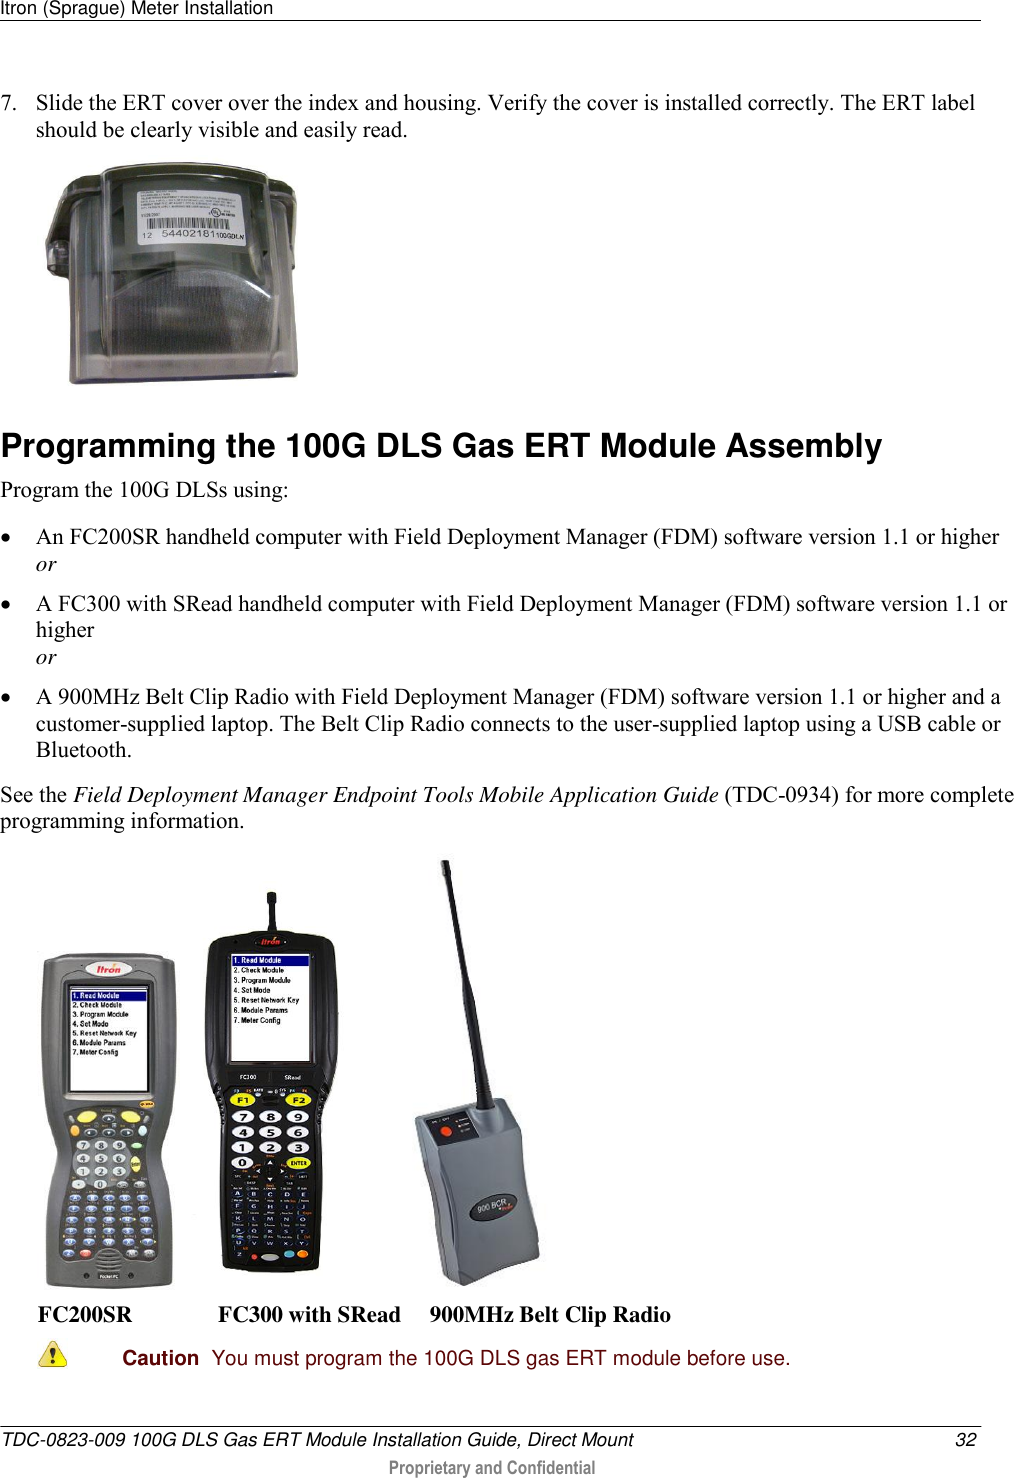 Itron (Sprague) Meter Installation   TDC-0823-009 100G DLS Gas ERT Module Installation Guide, Direct Mount  32  Proprietary and Confidential    7. Slide the ERT cover over the index and housing. Verify the cover is installed correctly. The ERT label should be clearly visible and easily read.  Programming the 100G DLS Gas ERT Module Assembly Program the 100G DLSs using:  An FC200SR handheld computer with Field Deployment Manager (FDM) software version 1.1 or higher or  A FC300 with SRead handheld computer with Field Deployment Manager (FDM) software version 1.1 or higher or  A 900MHz Belt Clip Radio with Field Deployment Manager (FDM) software version 1.1 or higher and a customer-supplied laptop. The Belt Clip Radio connects to the user-supplied laptop using a USB cable or Bluetooth. See the Field Deployment Manager Endpoint Tools Mobile Application Guide (TDC-0934) for more complete programming information.       FC200SR               FC300 with SRead     900MHz Belt Clip Radio  Caution  You must program the 100G DLS gas ERT module before use.  